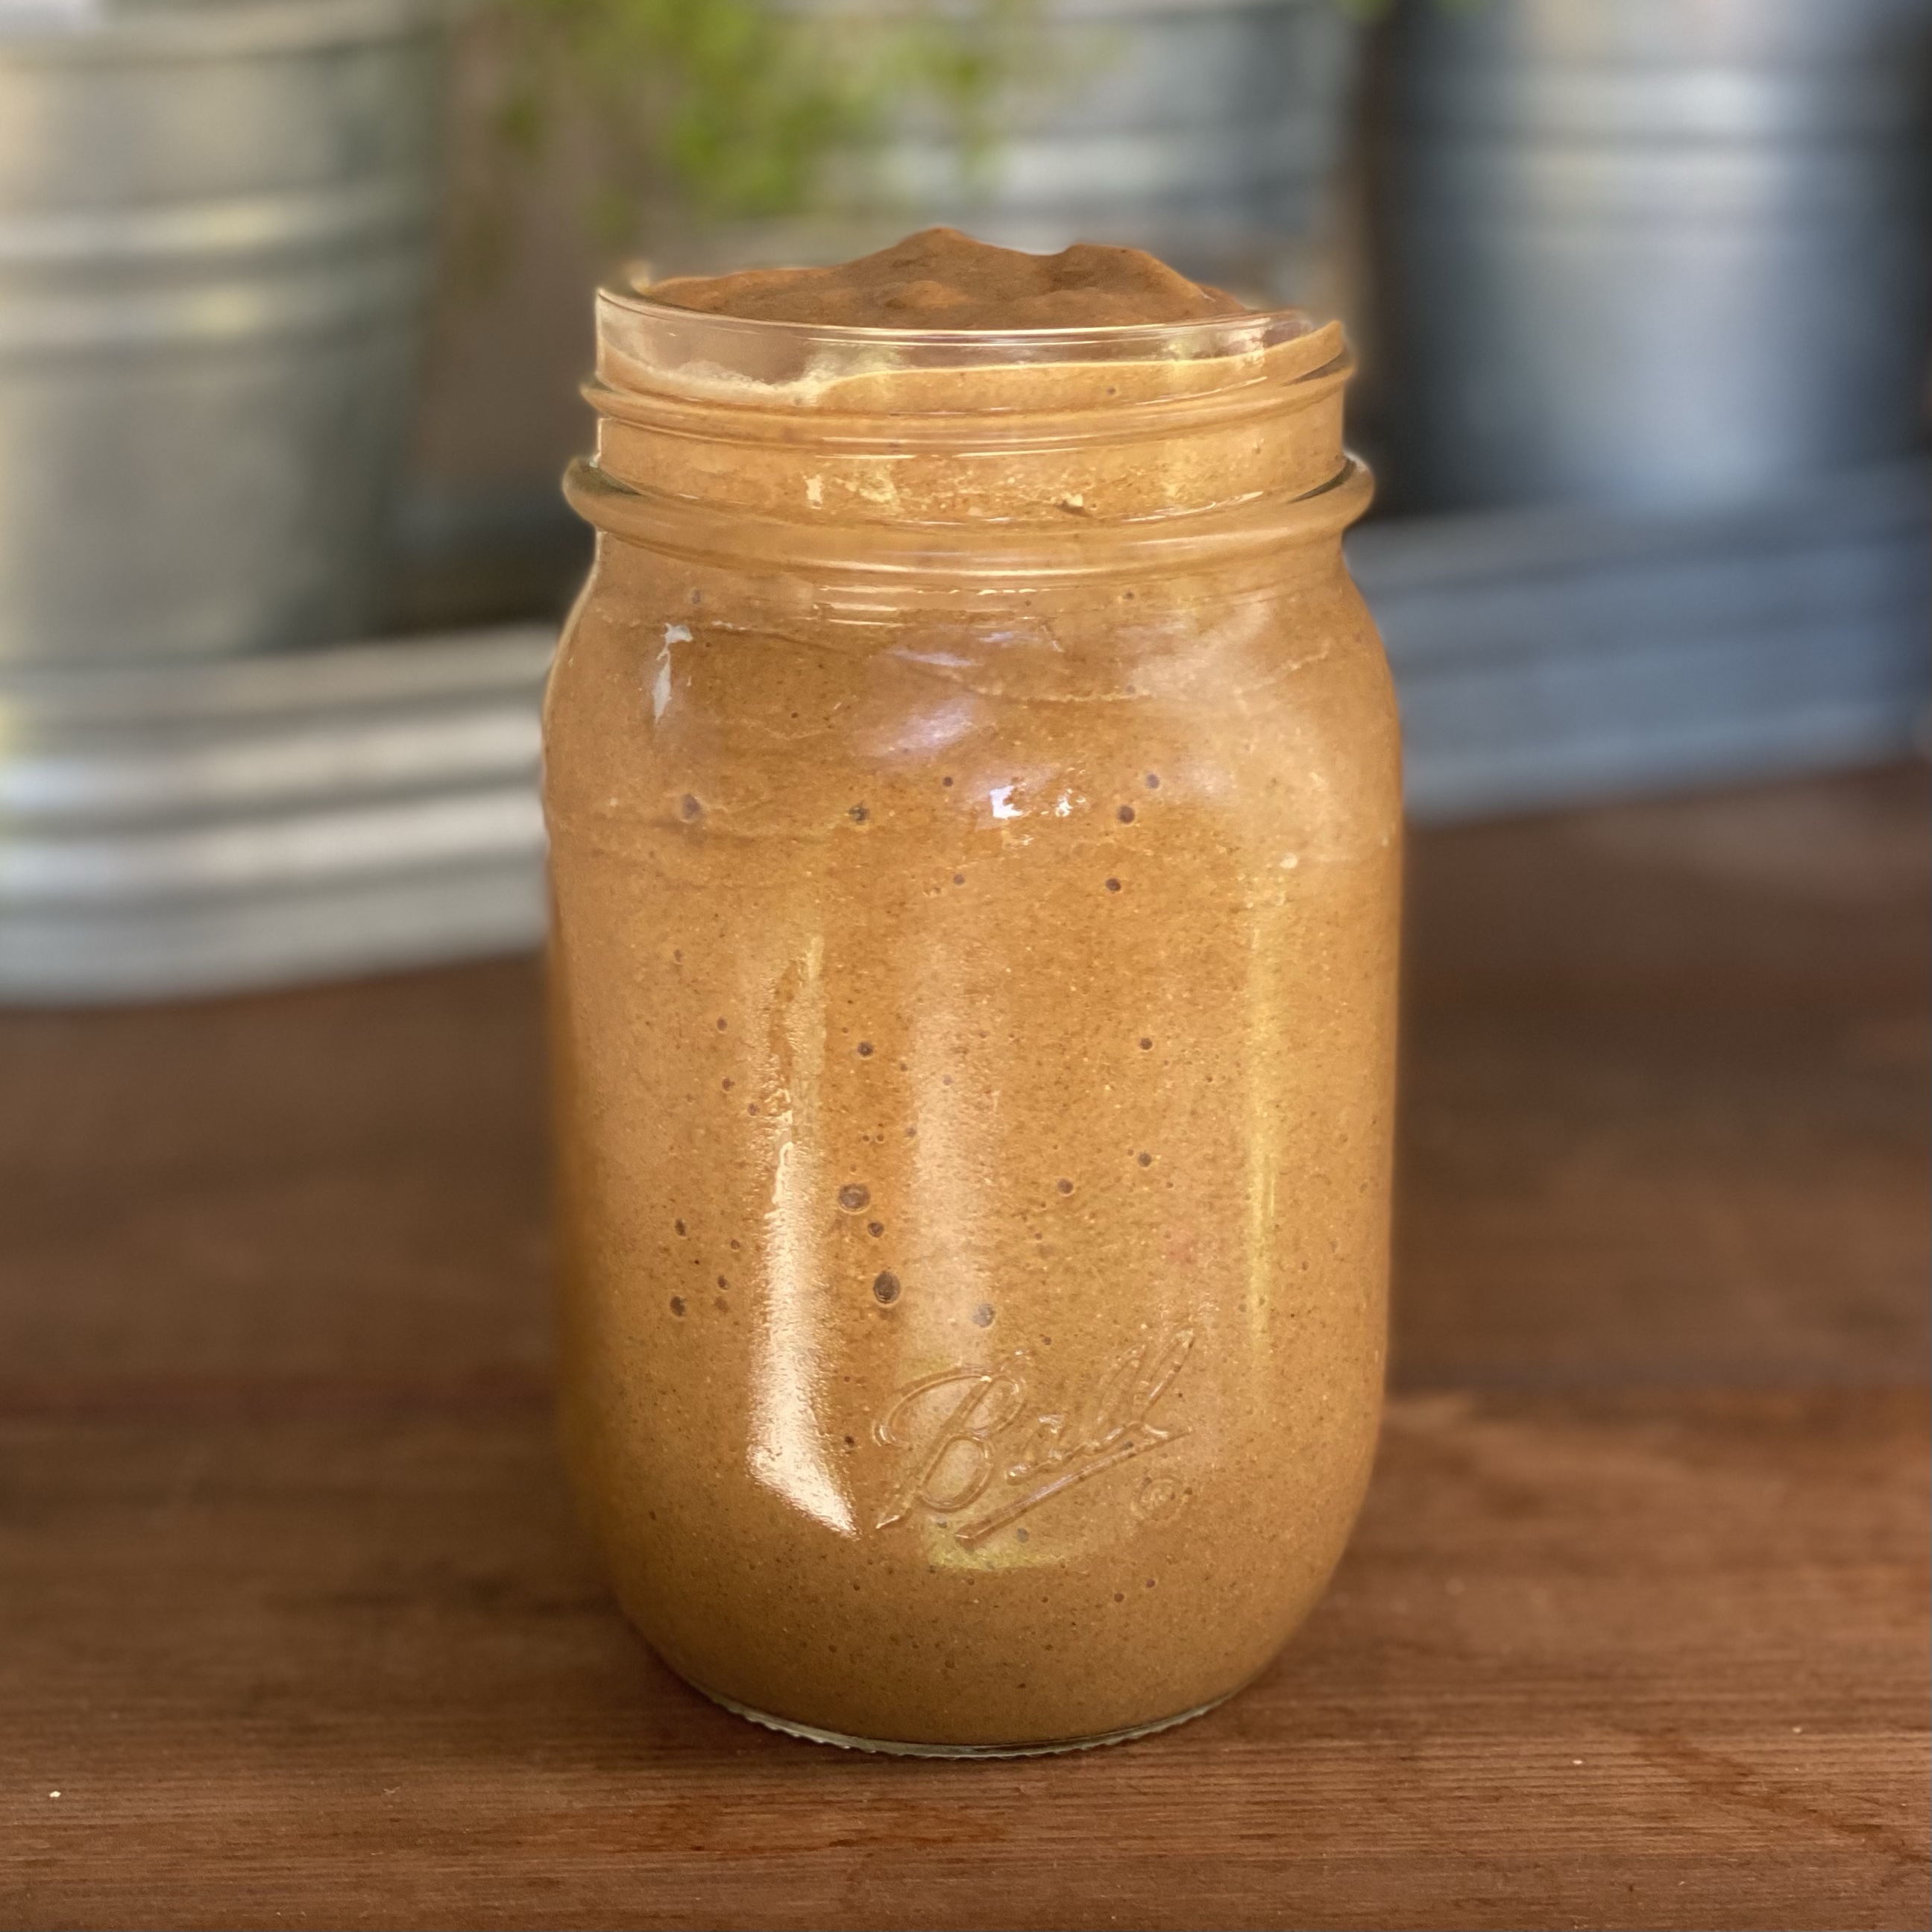 Malted Chocolate Smoothie with Maca for Hormone Balance